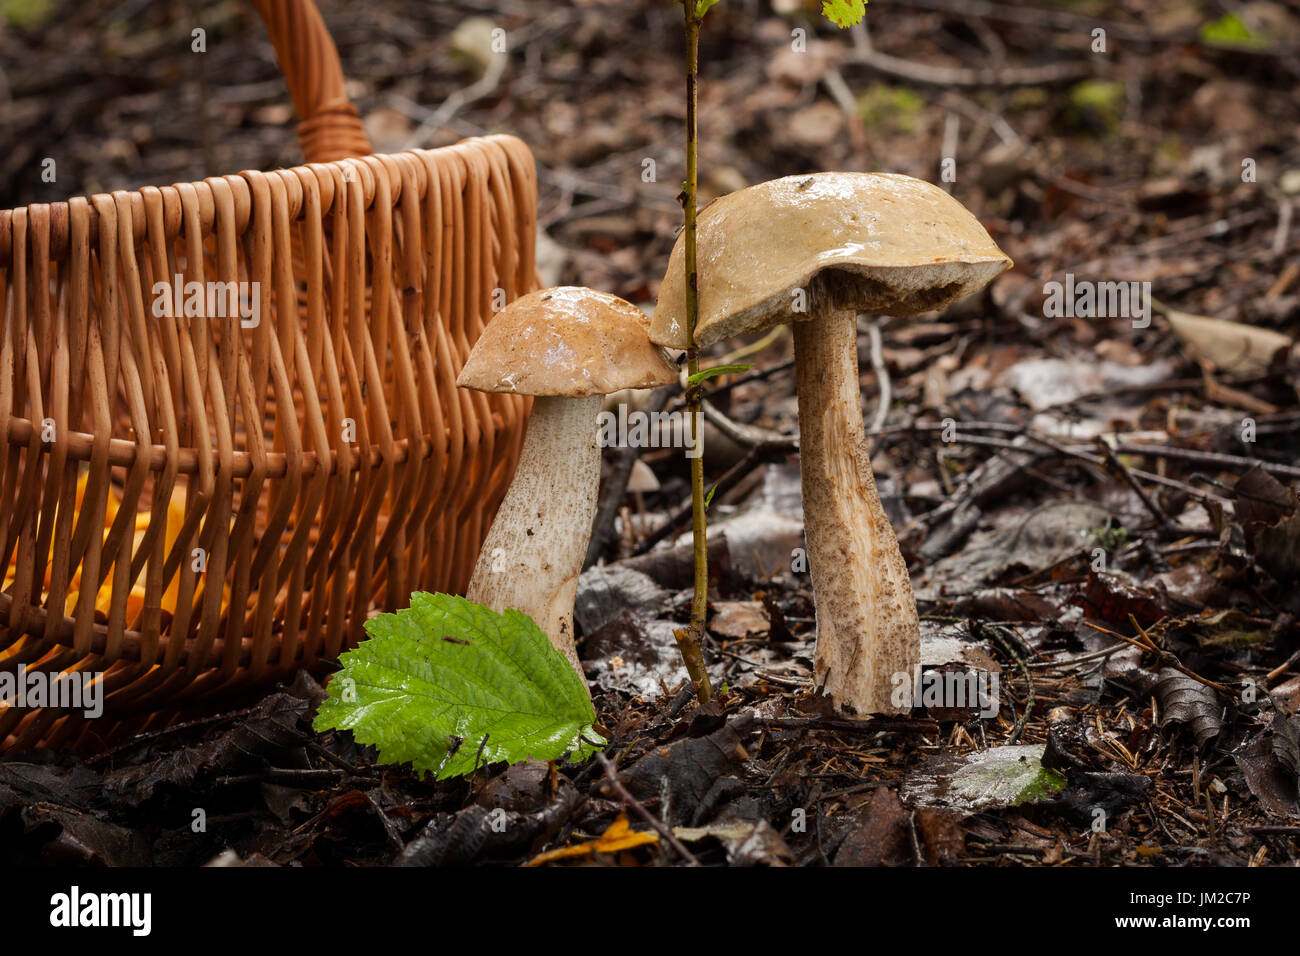 Two Edible Mushrooms Brown Cap Boletus (Leccinum Scabrum) Growing In Autumn Forest With Wicker Basket. Wet Hats Mushroom. Wild Mushroom In Forest. Stock Photo